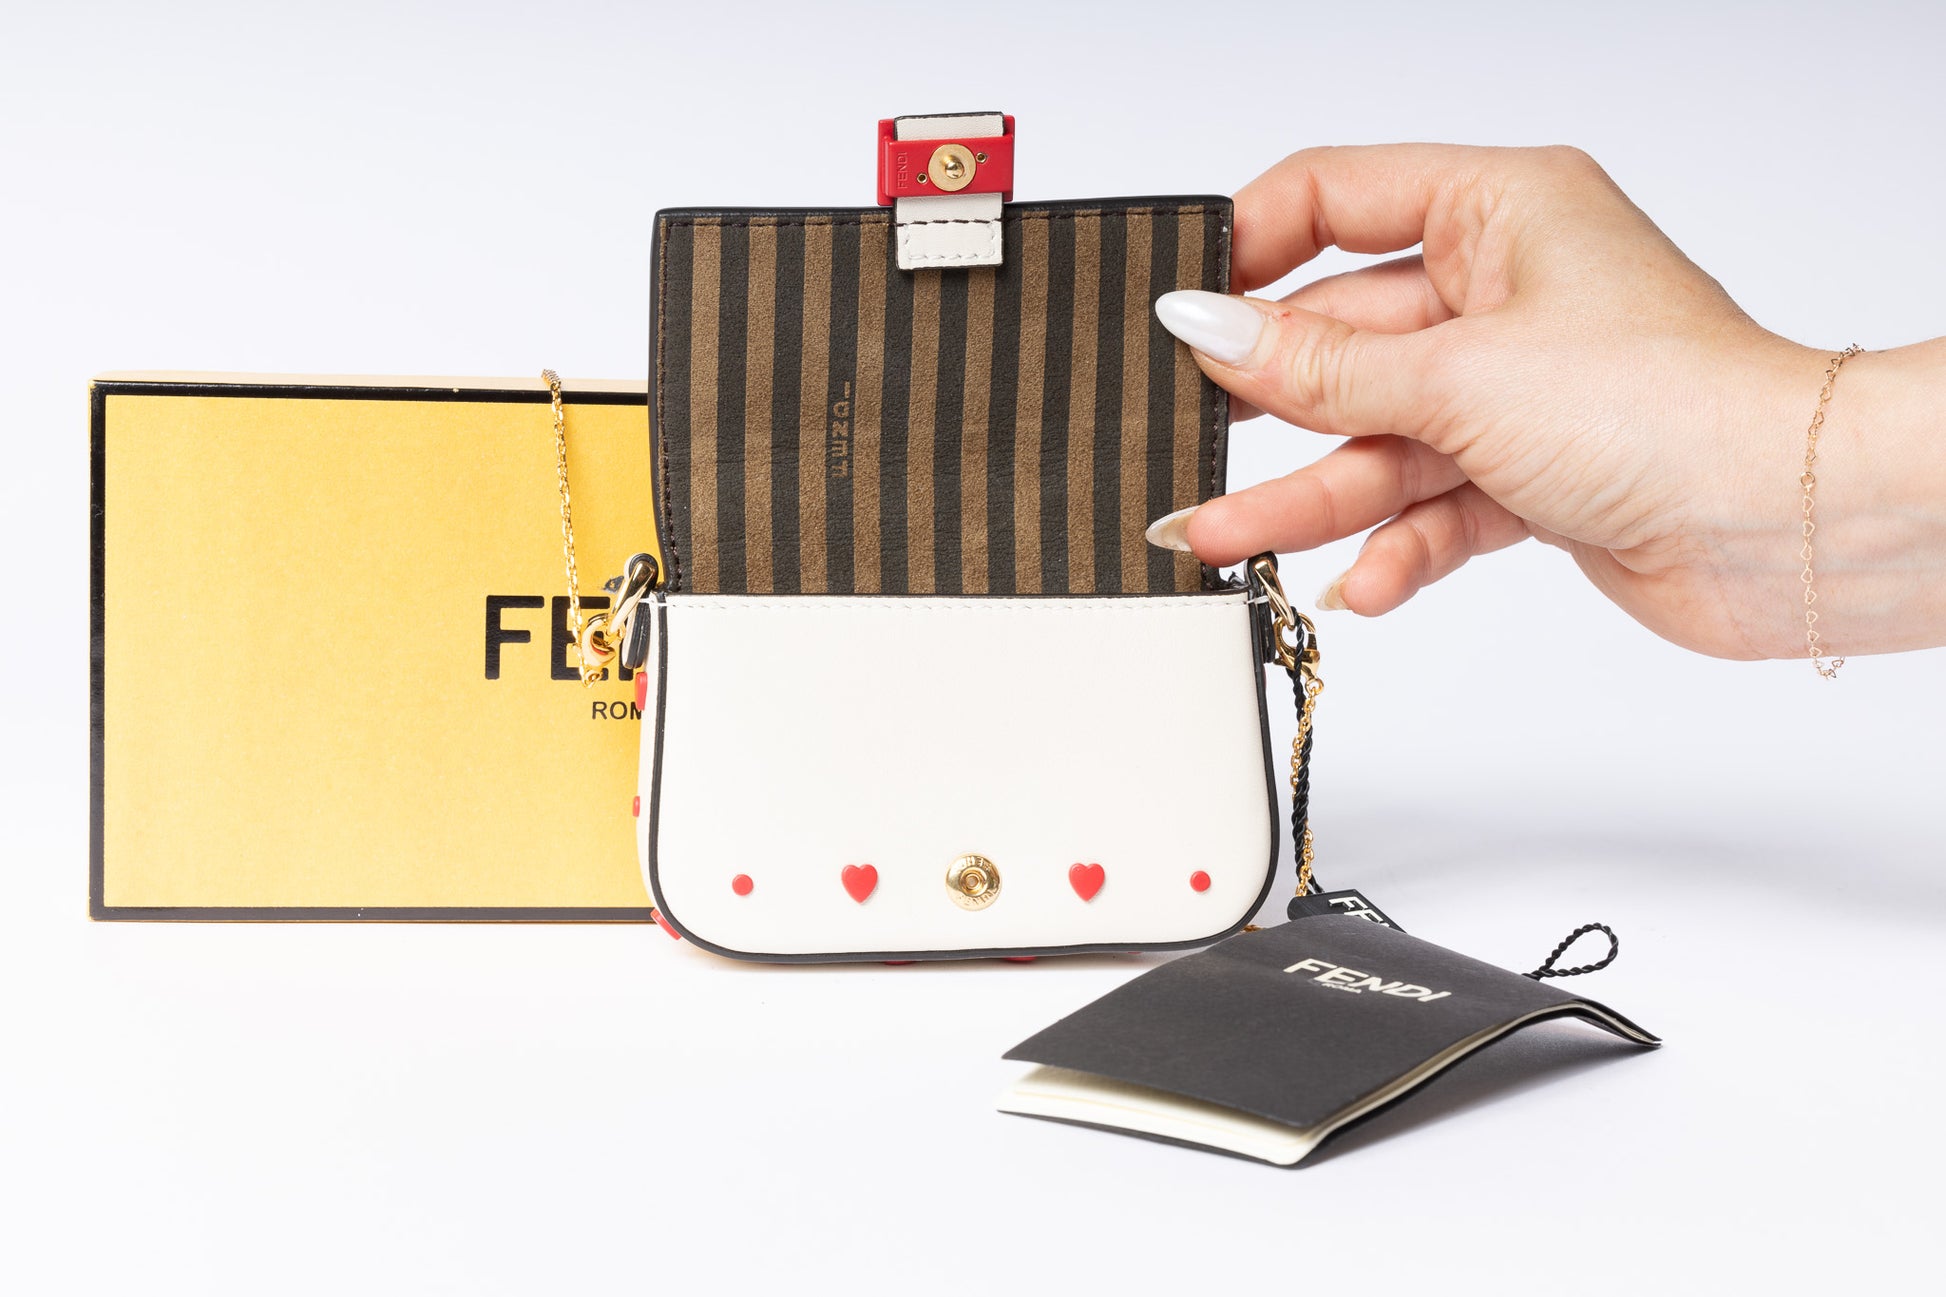 Fendi Micro Baguette Heart Bag - Cute and compact, a playful accessory that adds charm to any outfit.